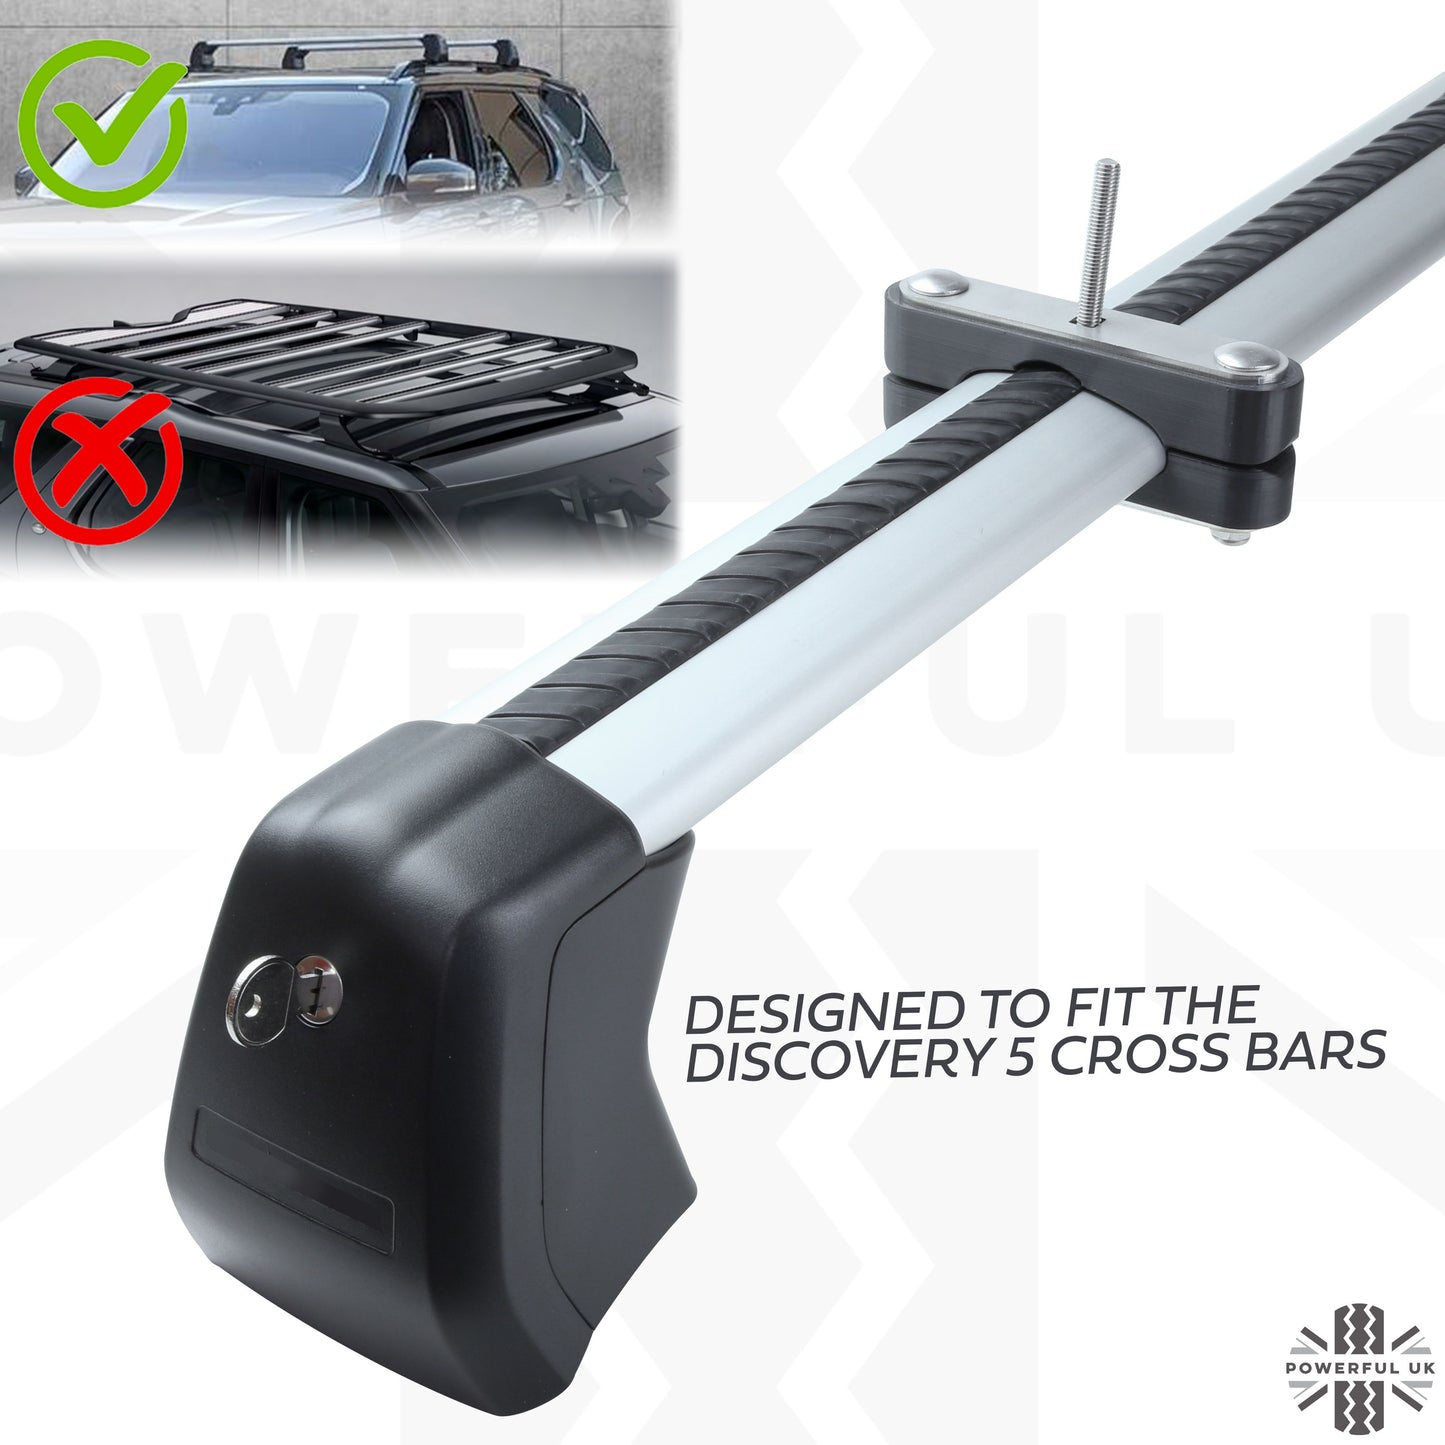 CROSS BAR Mount Clamp Kit for the Land Rover Discovery 5 - Kit D (Black)